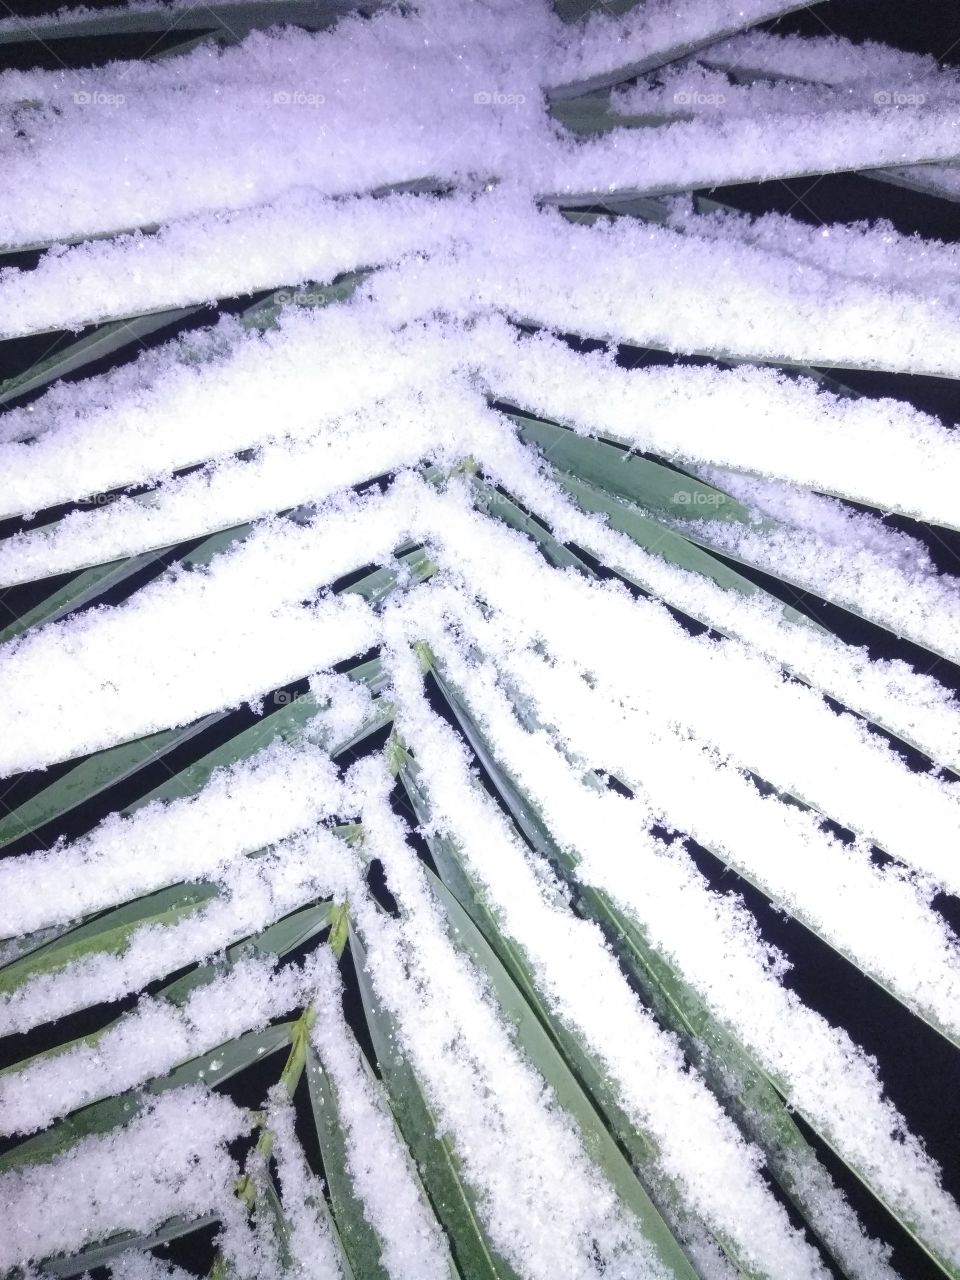 Houston Palm Trees Covered with Snow